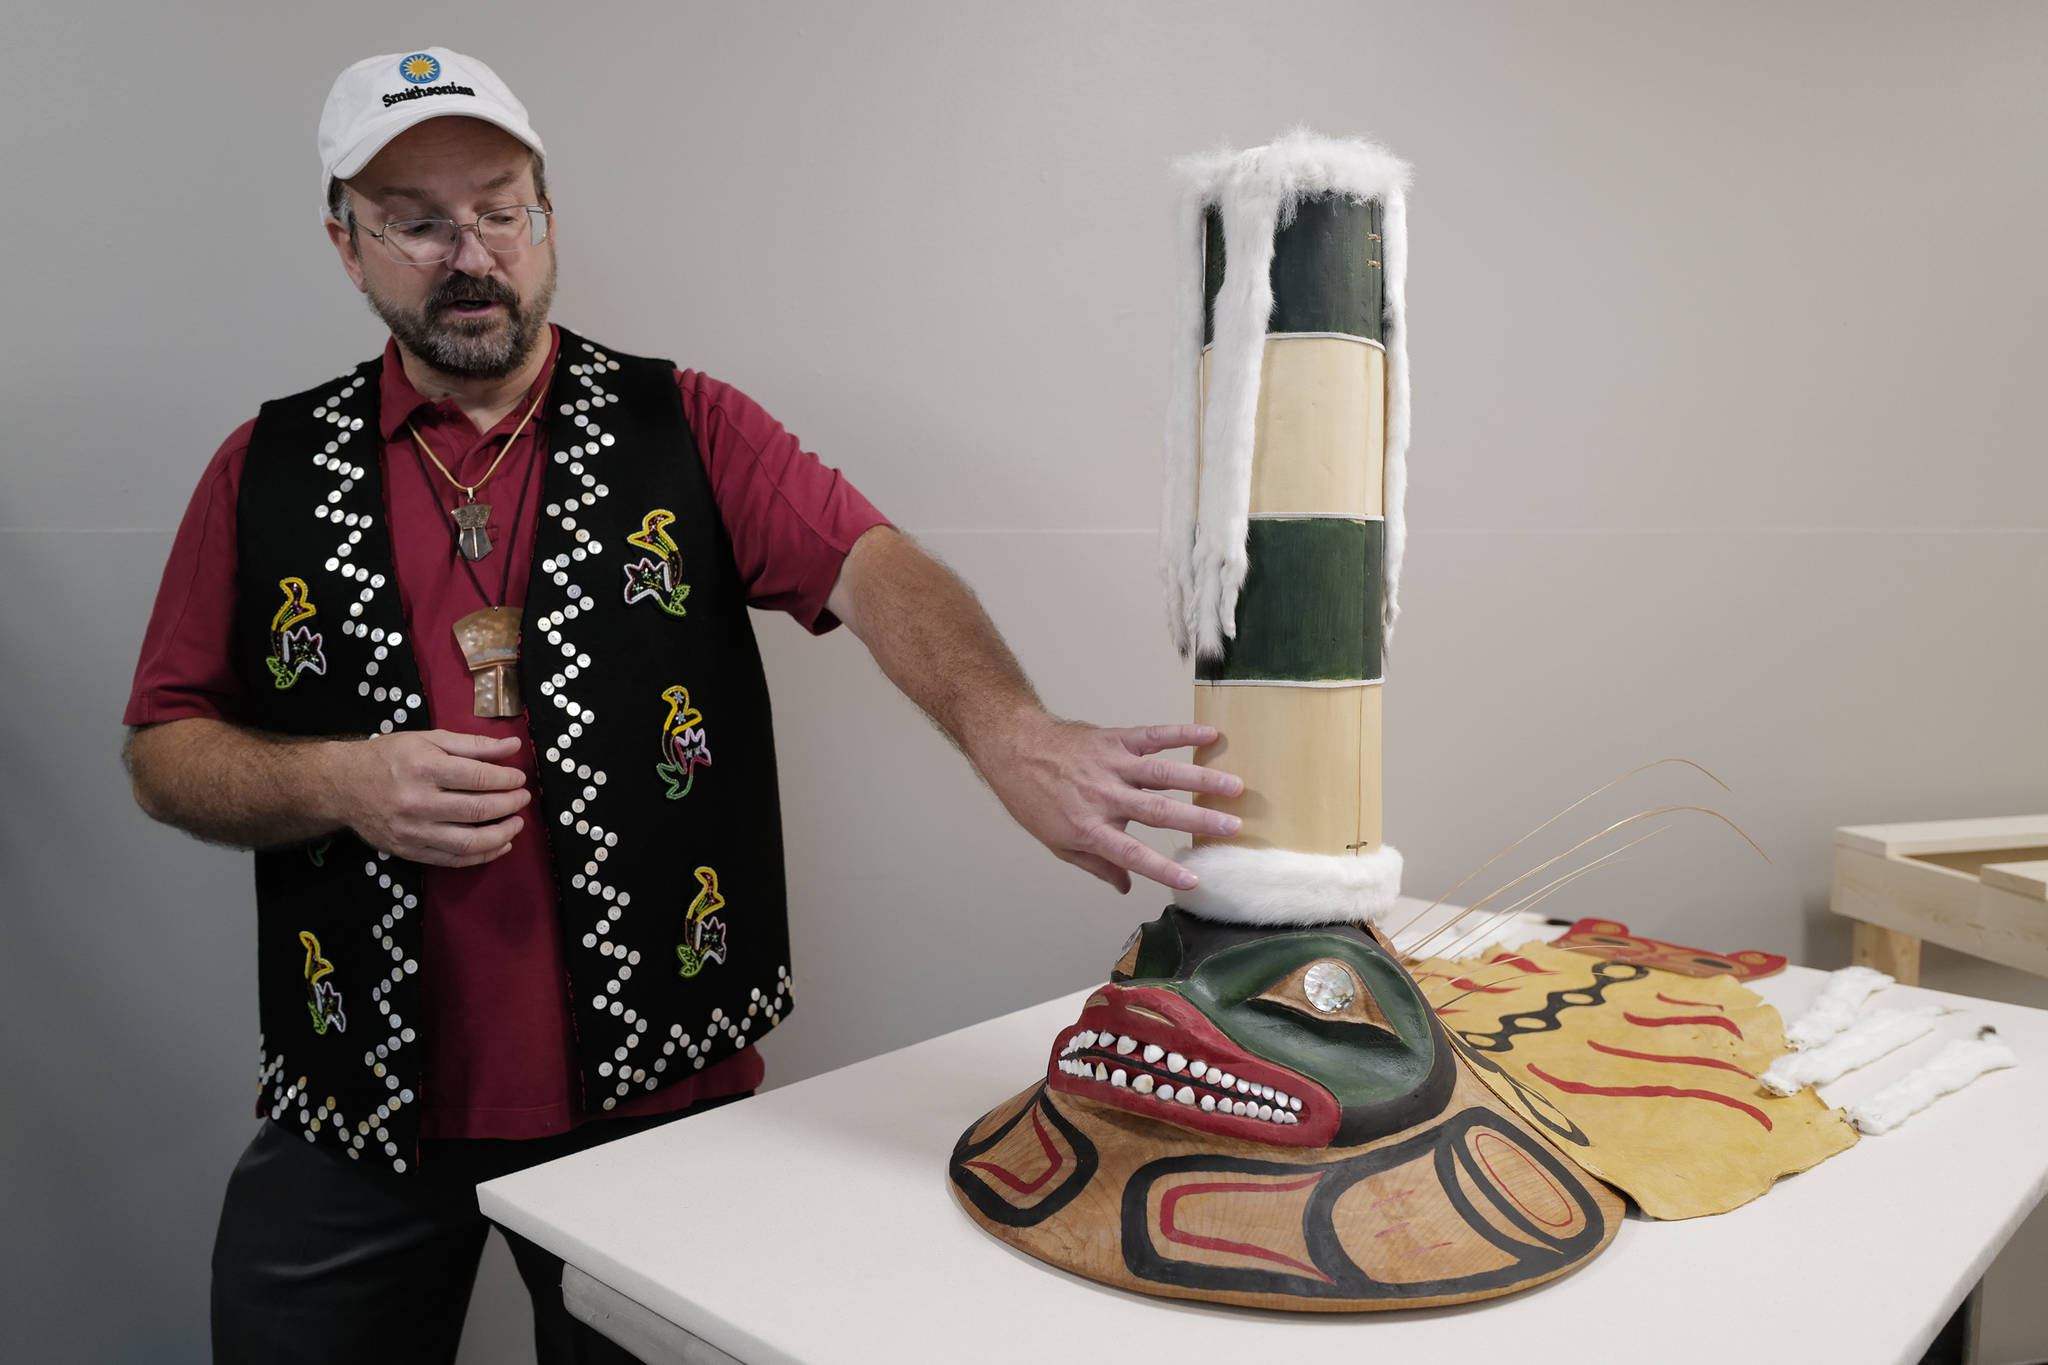 Photos and Video: Sculpin hat returns to Tlingit clan